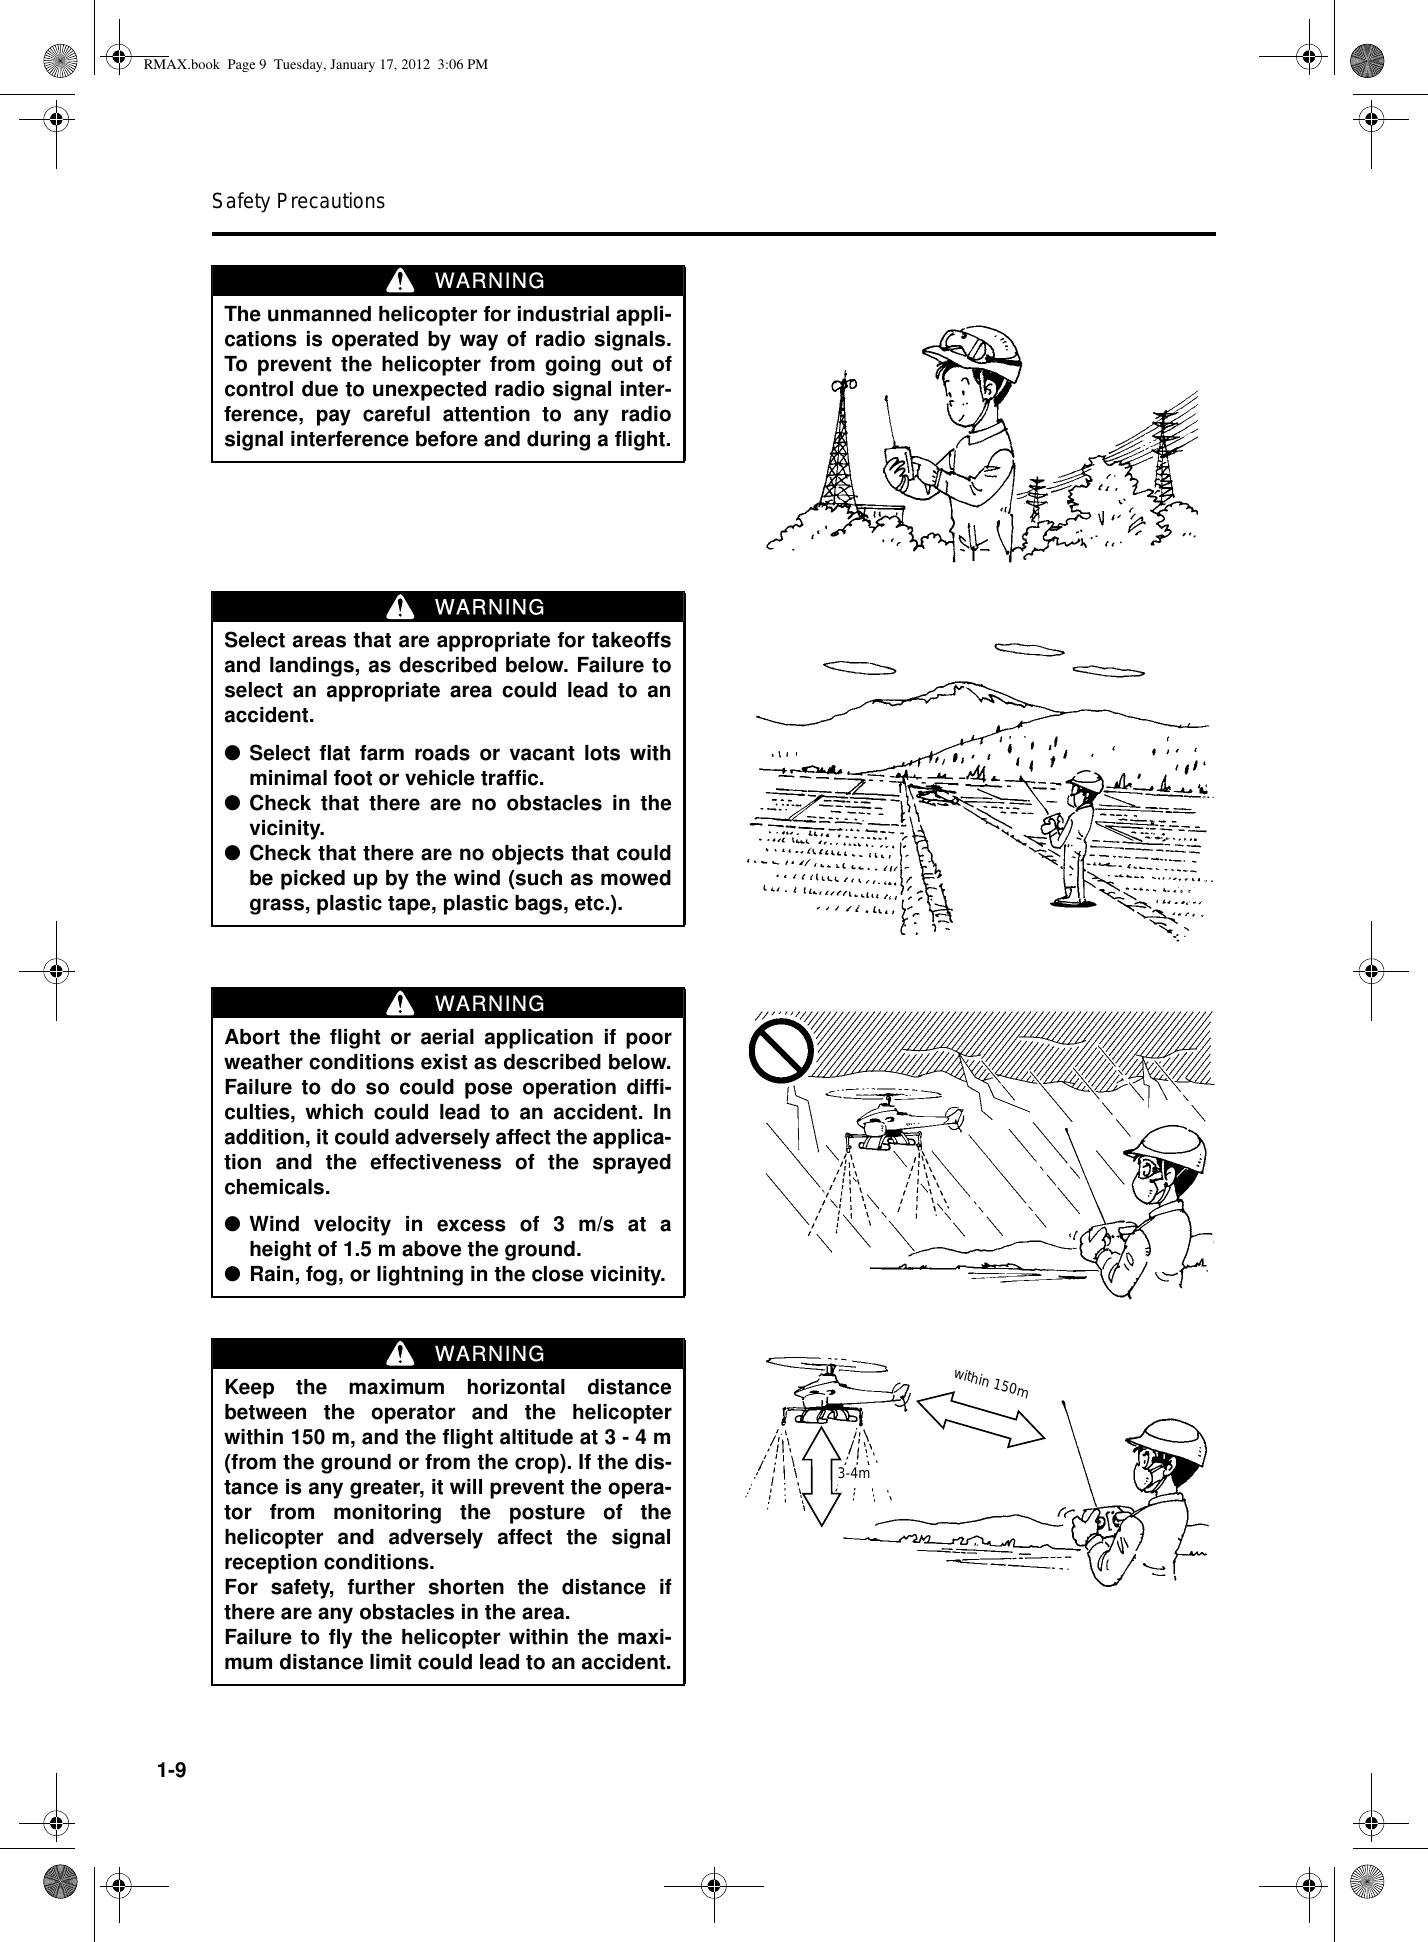 Safety Precautions1-9The unmanned helicopter for industrial appli-cations is operated by way of radio signals.To prevent the helicopter from going out ofcontrol due to unexpected radio signal inter-ference, pay careful attention to any radiosignal interference before and during a flight.WARNINGSelect areas that are appropriate for takeoffsand landings, as described below. Failure toselect an appropriate area could lead to anaccident.●Select flat farm roads or vacant lots withminimal foot or vehicle traffic.●Check that there are no obstacles in thevicinity.●Check that there are no objects that couldbe picked up by the wind (such as mowedgrass, plastic tape, plastic bags, etc.).WARNINGAbort the flight or aerial application if poorweather conditions exist as described below.Failure to do so could pose operation diffi-culties, which could lead to an accident. Inaddition, it could adversely affect the applica-tion and the effectiveness of the sprayedchemicals.●Wind velocity in excess of 3 m/s at aheight of 1.5 m above the ground.●Rain, fog, or lightning in the close vicinity.WARNINGKeep the maximum horizontal distancebetween the operator and the helicopterwithin 150 m, and the flight altitude at 3 - 4 m(from the ground or from the crop). If the dis-tance is any greater, it will prevent the opera-tor from monitoring the posture of thehelicopter and adversely affect the signalreception conditions.For safety, further shorten the distance ifthere are any obstacles in the area.Failure to fly the helicopter within the maxi-mum distance limit could lead to an accident.WARNINGwithin 150m3-4mRMAX.book  Page 9  Tuesday, January 17, 2012  3:06 PM